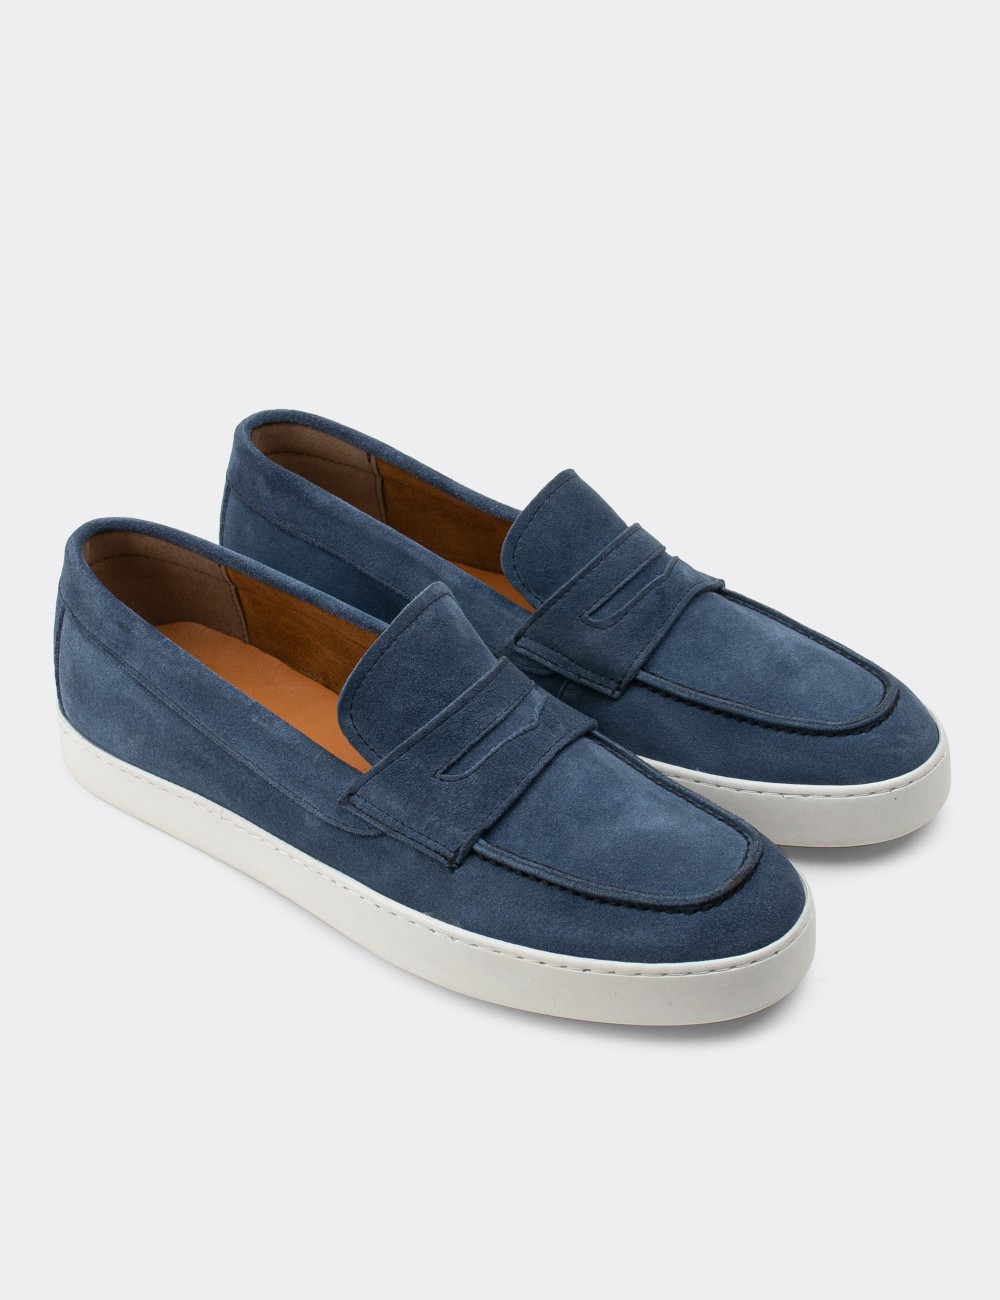 Blue Suede Leather Loafers - 01870MMVIC01